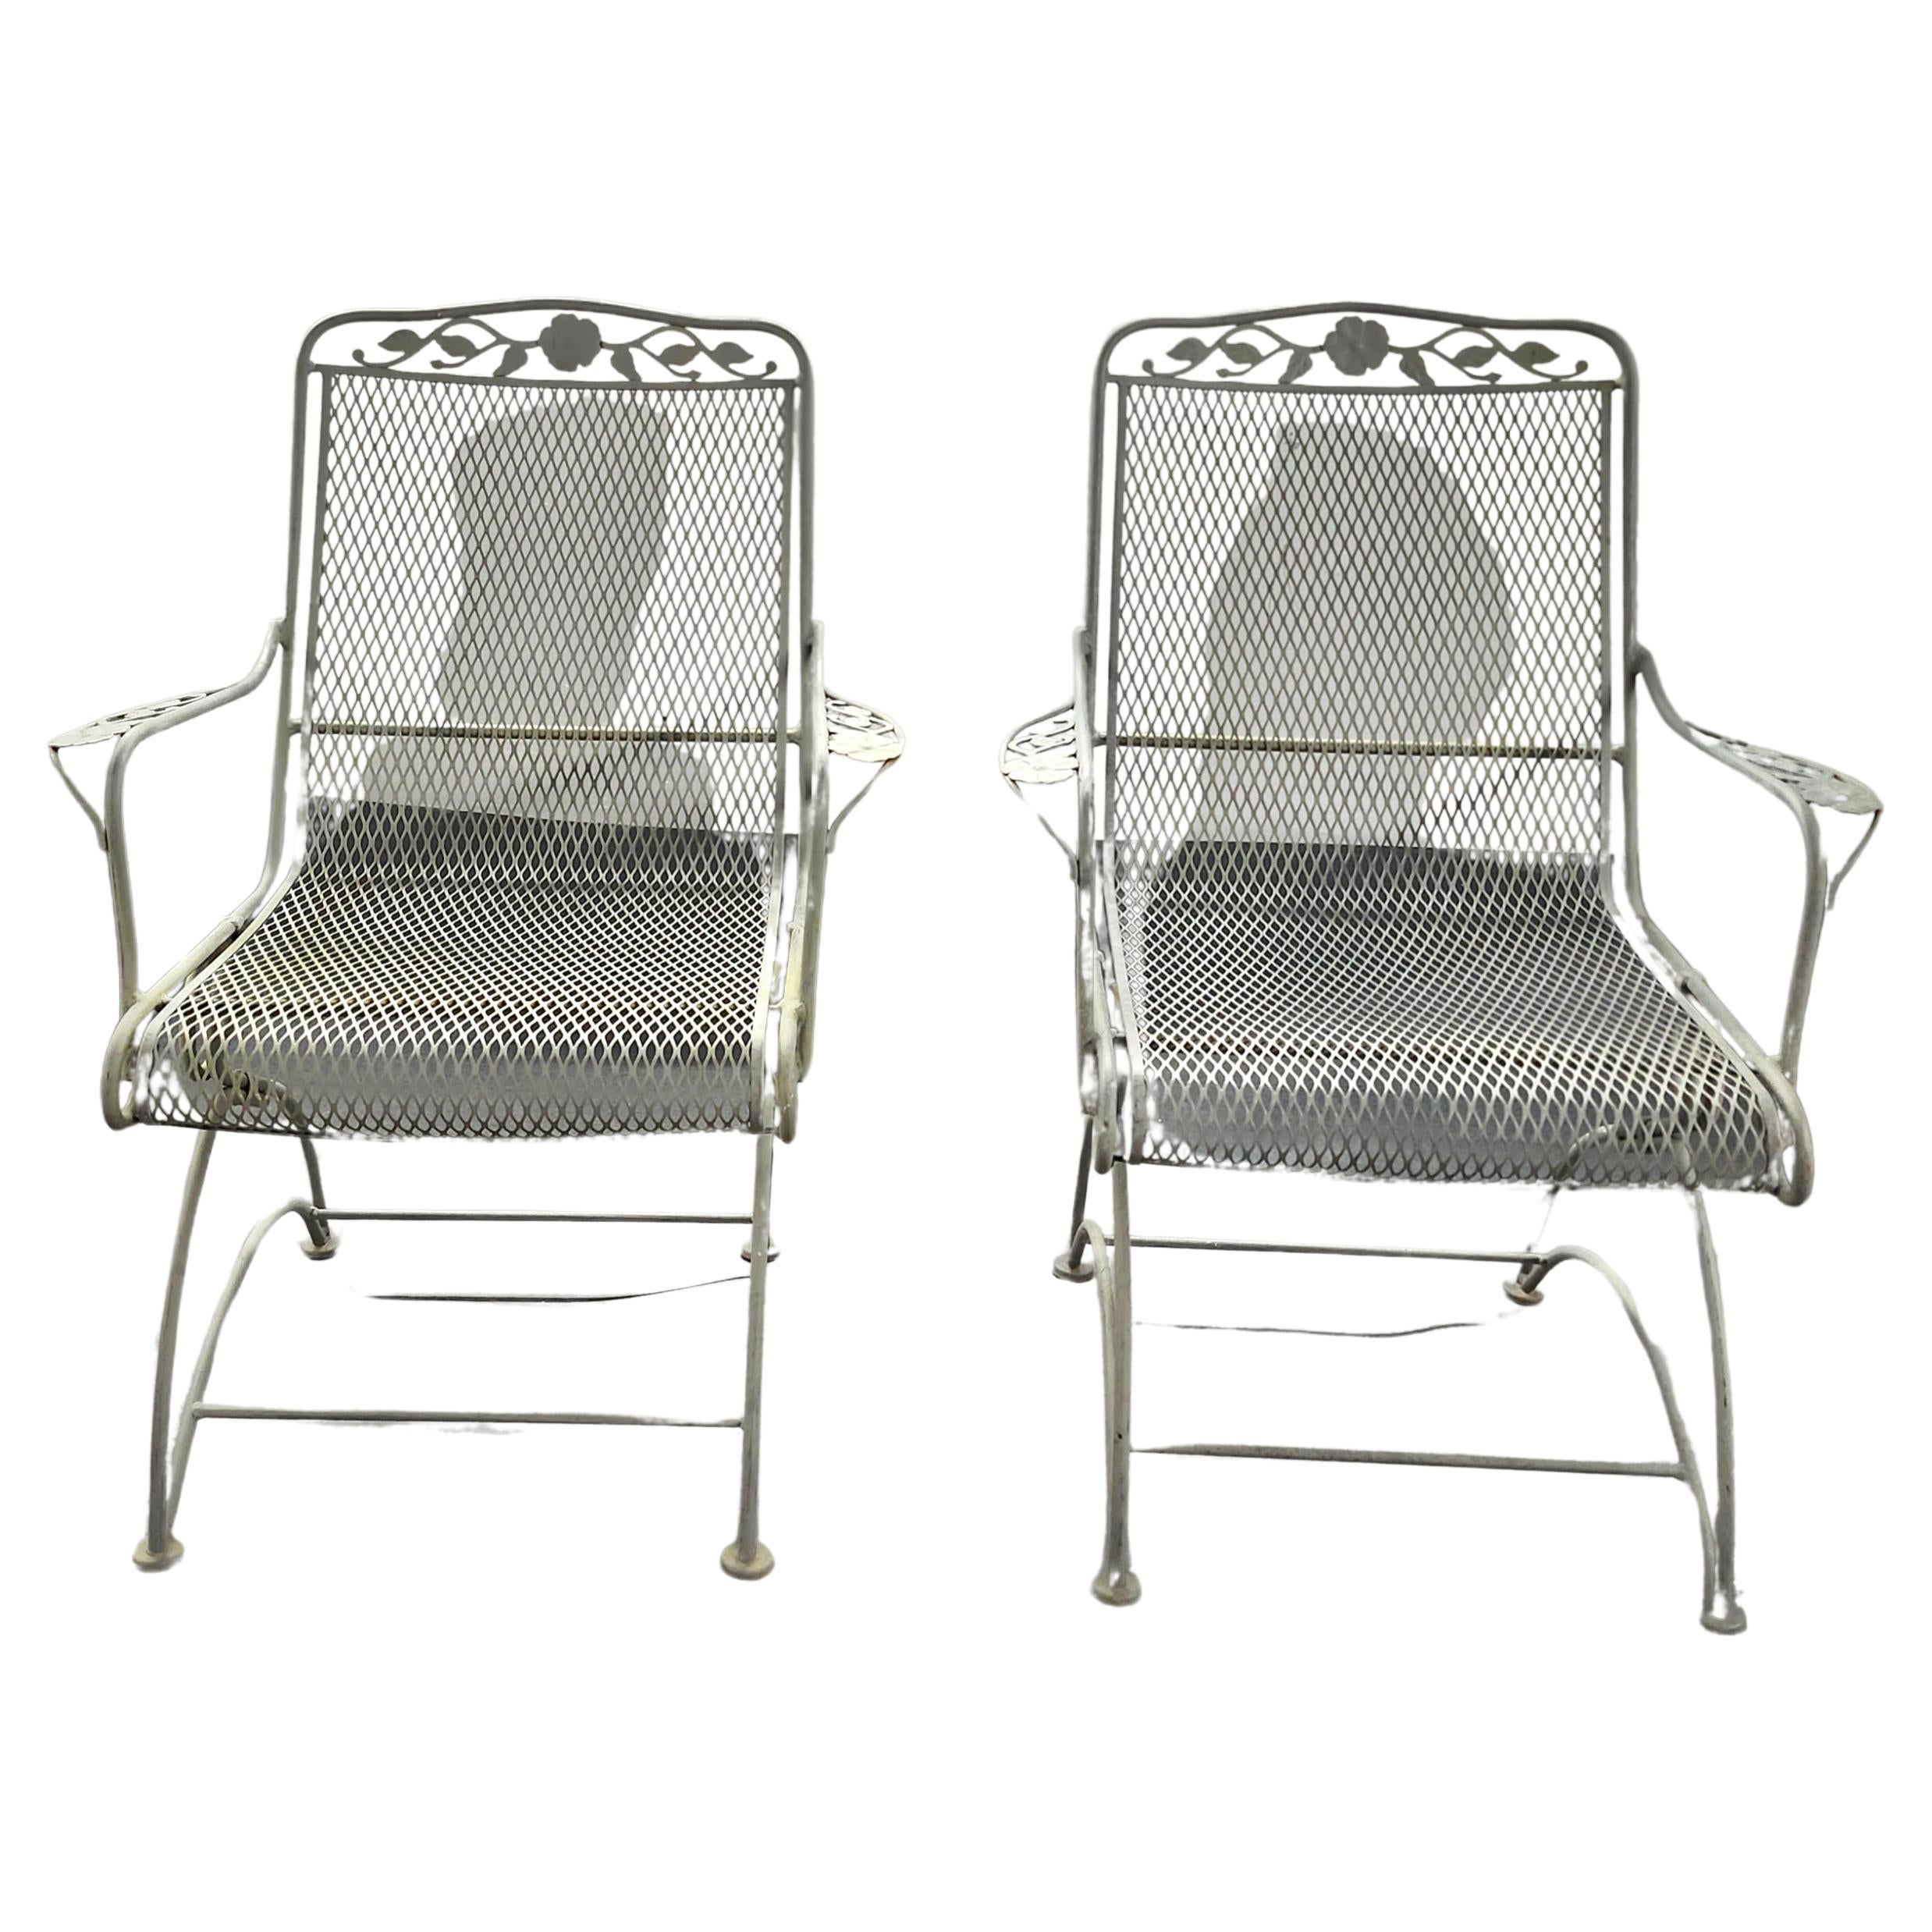 Vintage Wrought Iron Patio Lounge Chairs For Sale